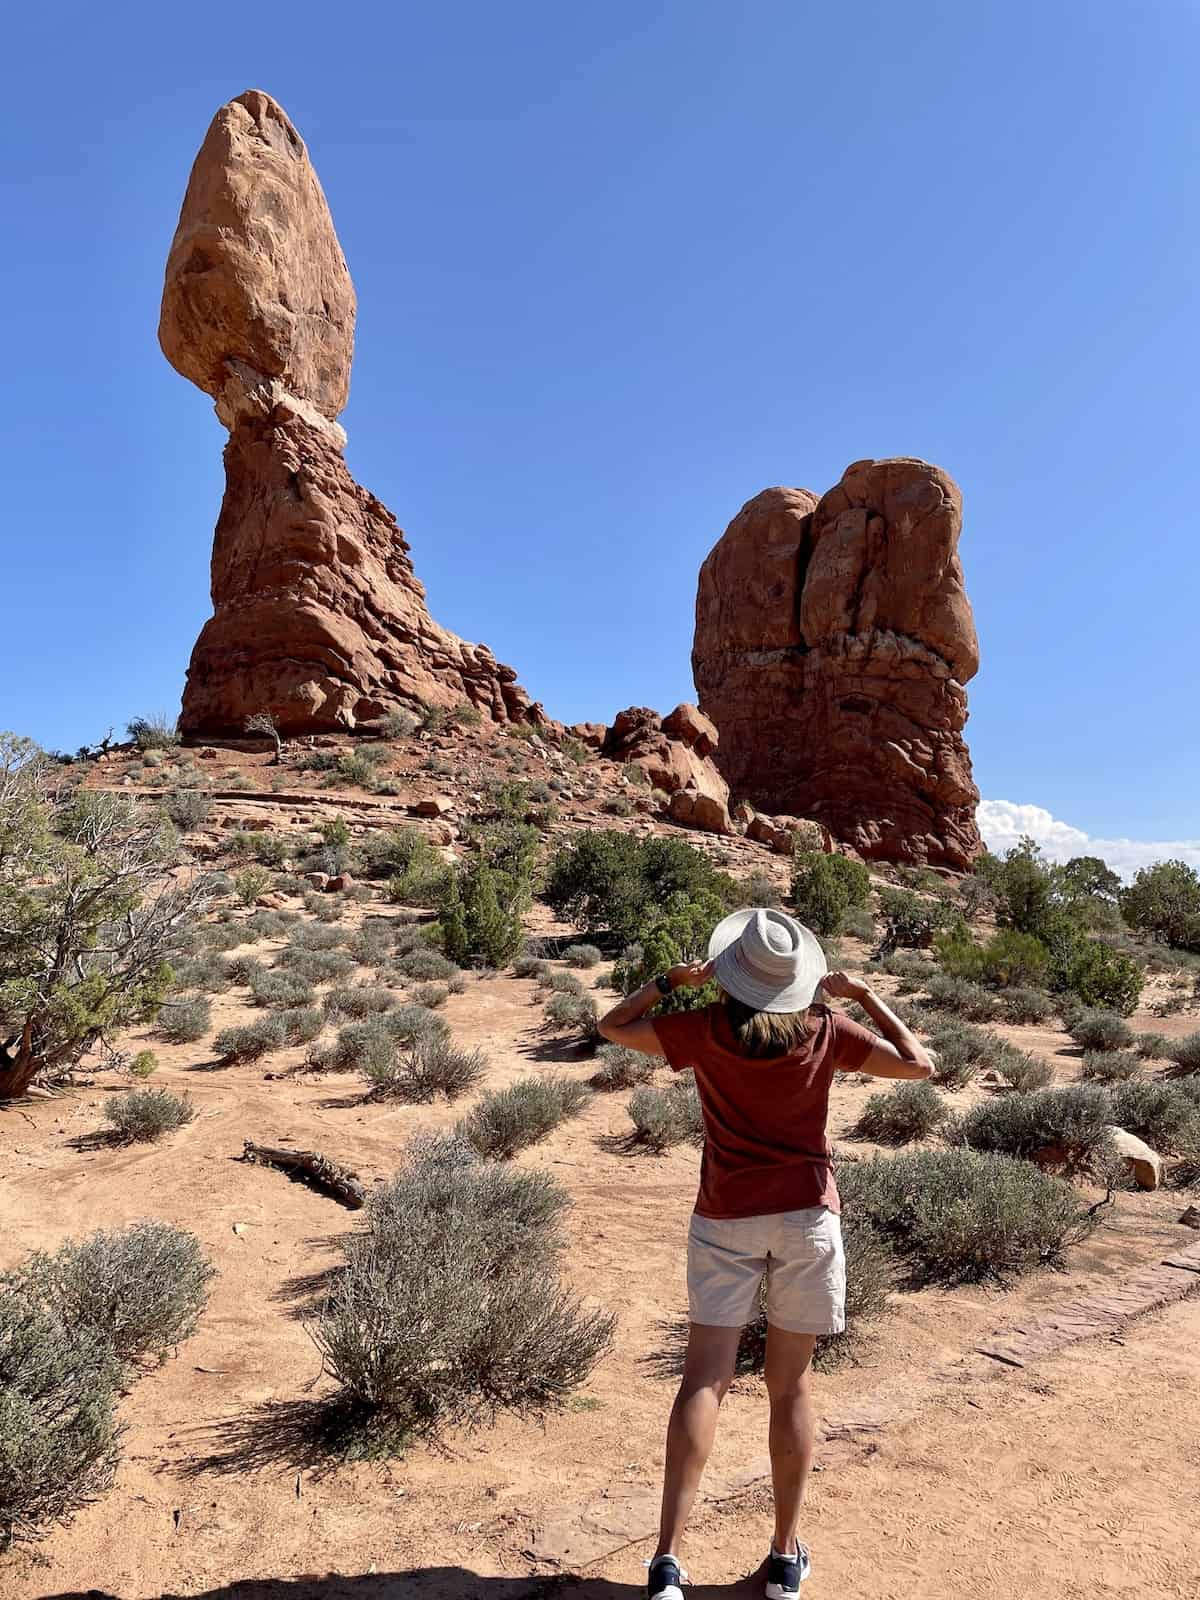 Woman in hat at Balanced Rock in Arches National Park.